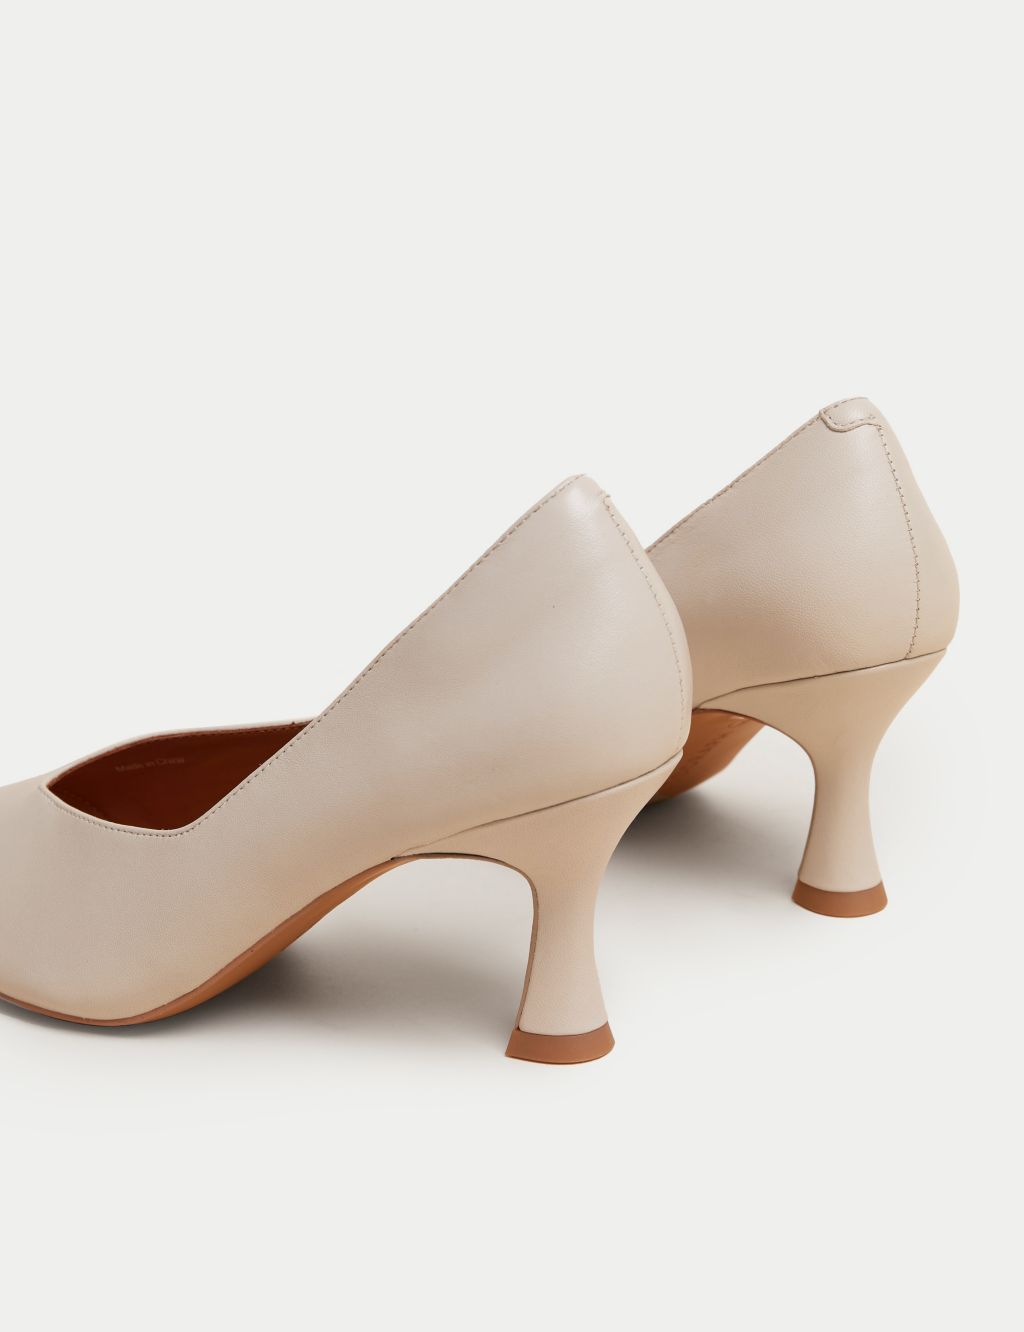 Leather Statement Pointed Court Shoes image 2